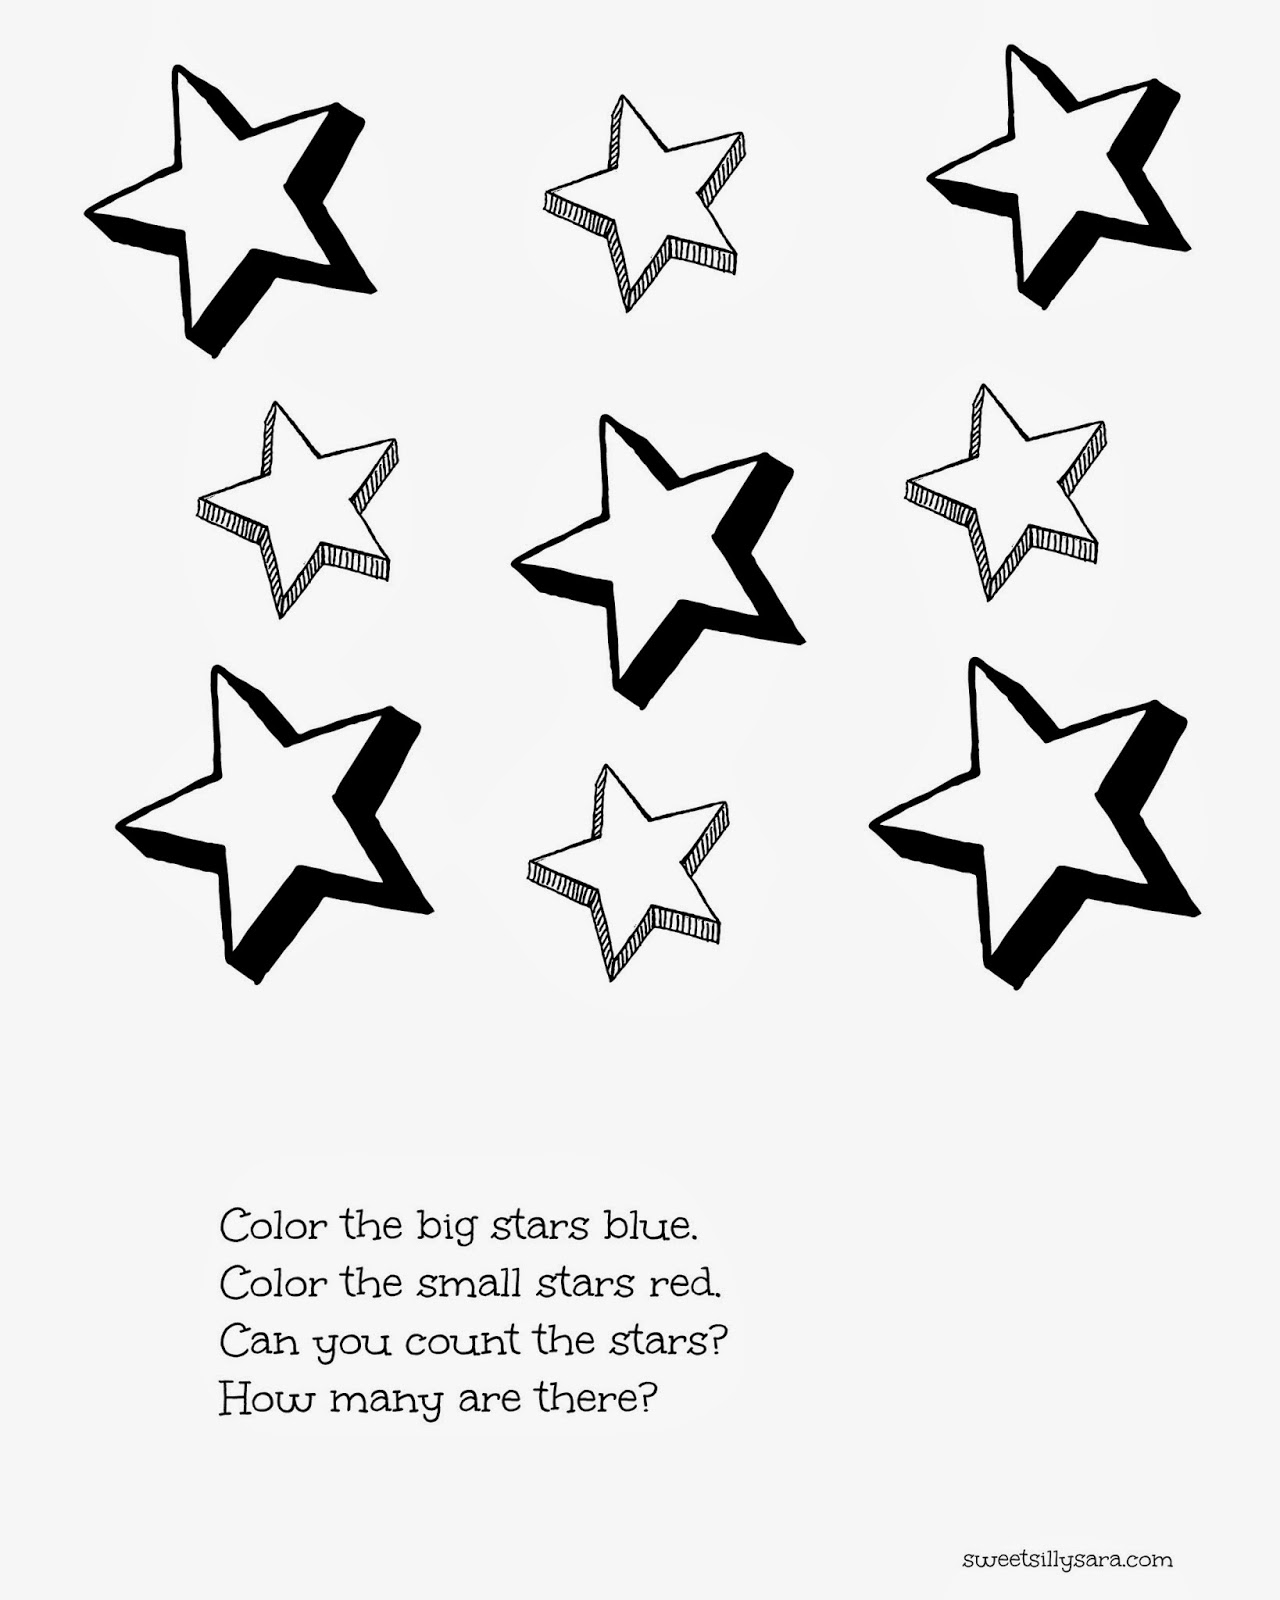 10 Best Images Of Counting Stars Worksheet Number The 